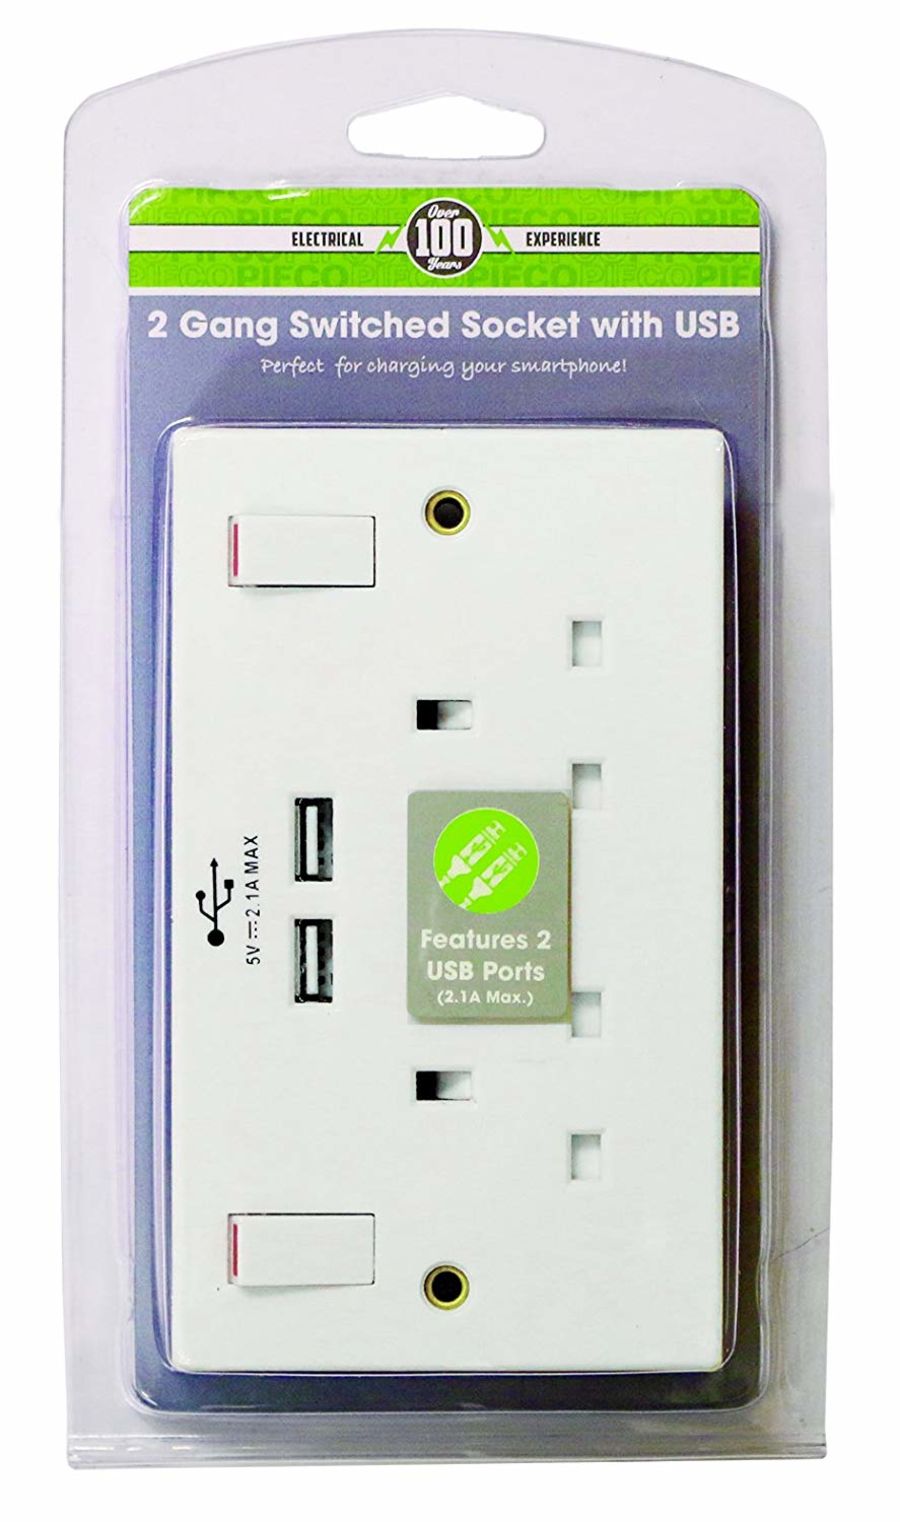 PIFCO_White_Double_Switched_Socket___2_Gang_With_Usb_Ports_Charger